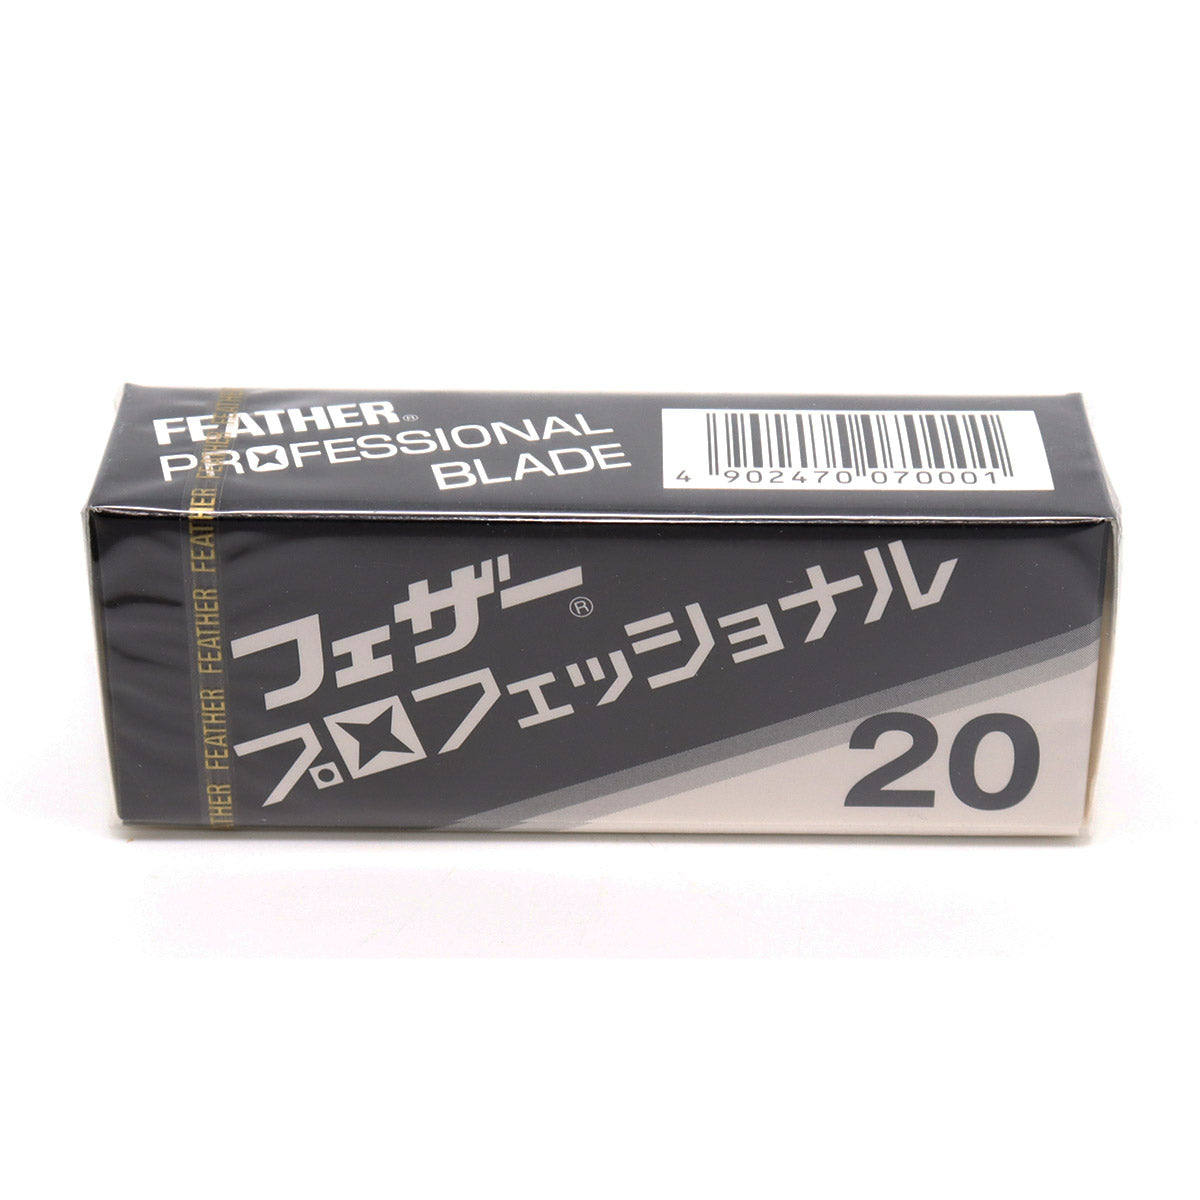 Feather Artist Club Pro Razor Blades 20 Count package